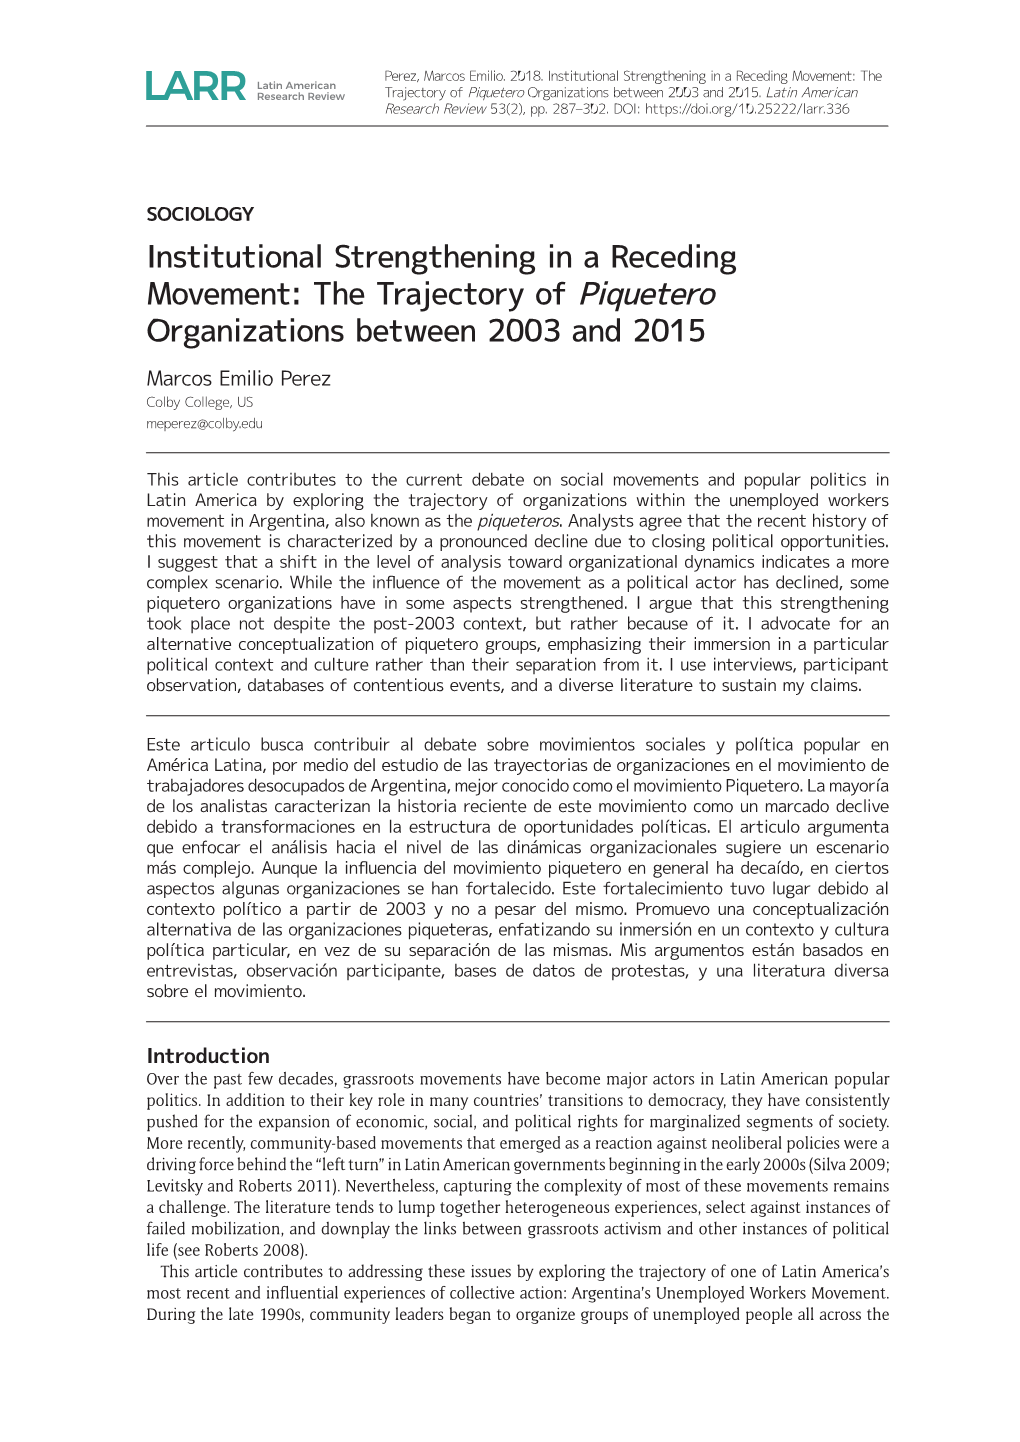 Institutional Strengthening in a Receding Movement: the Trajectory of Piquetero Organizations Between 2003 and 2015